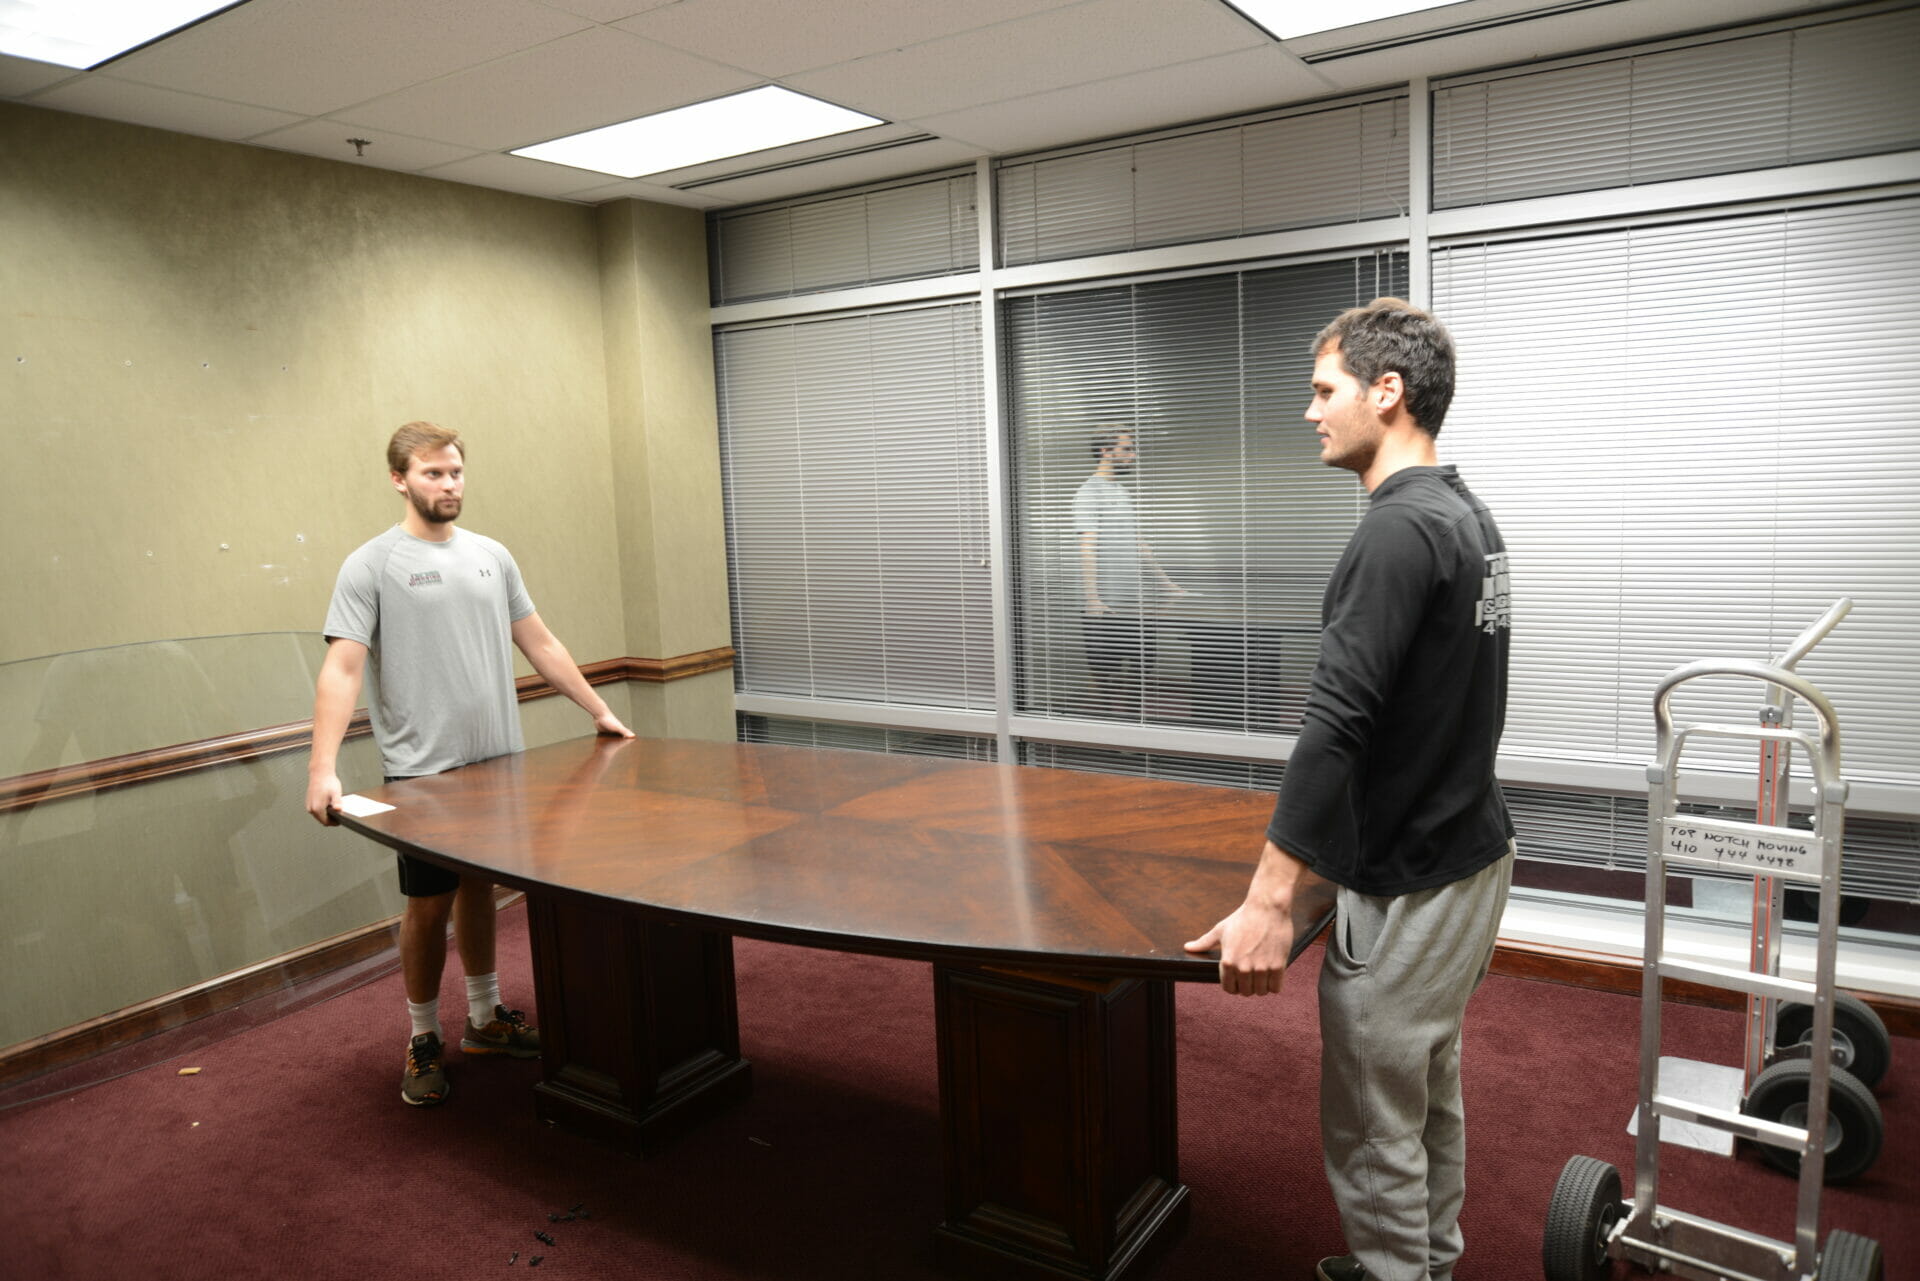 Conference room table being moved